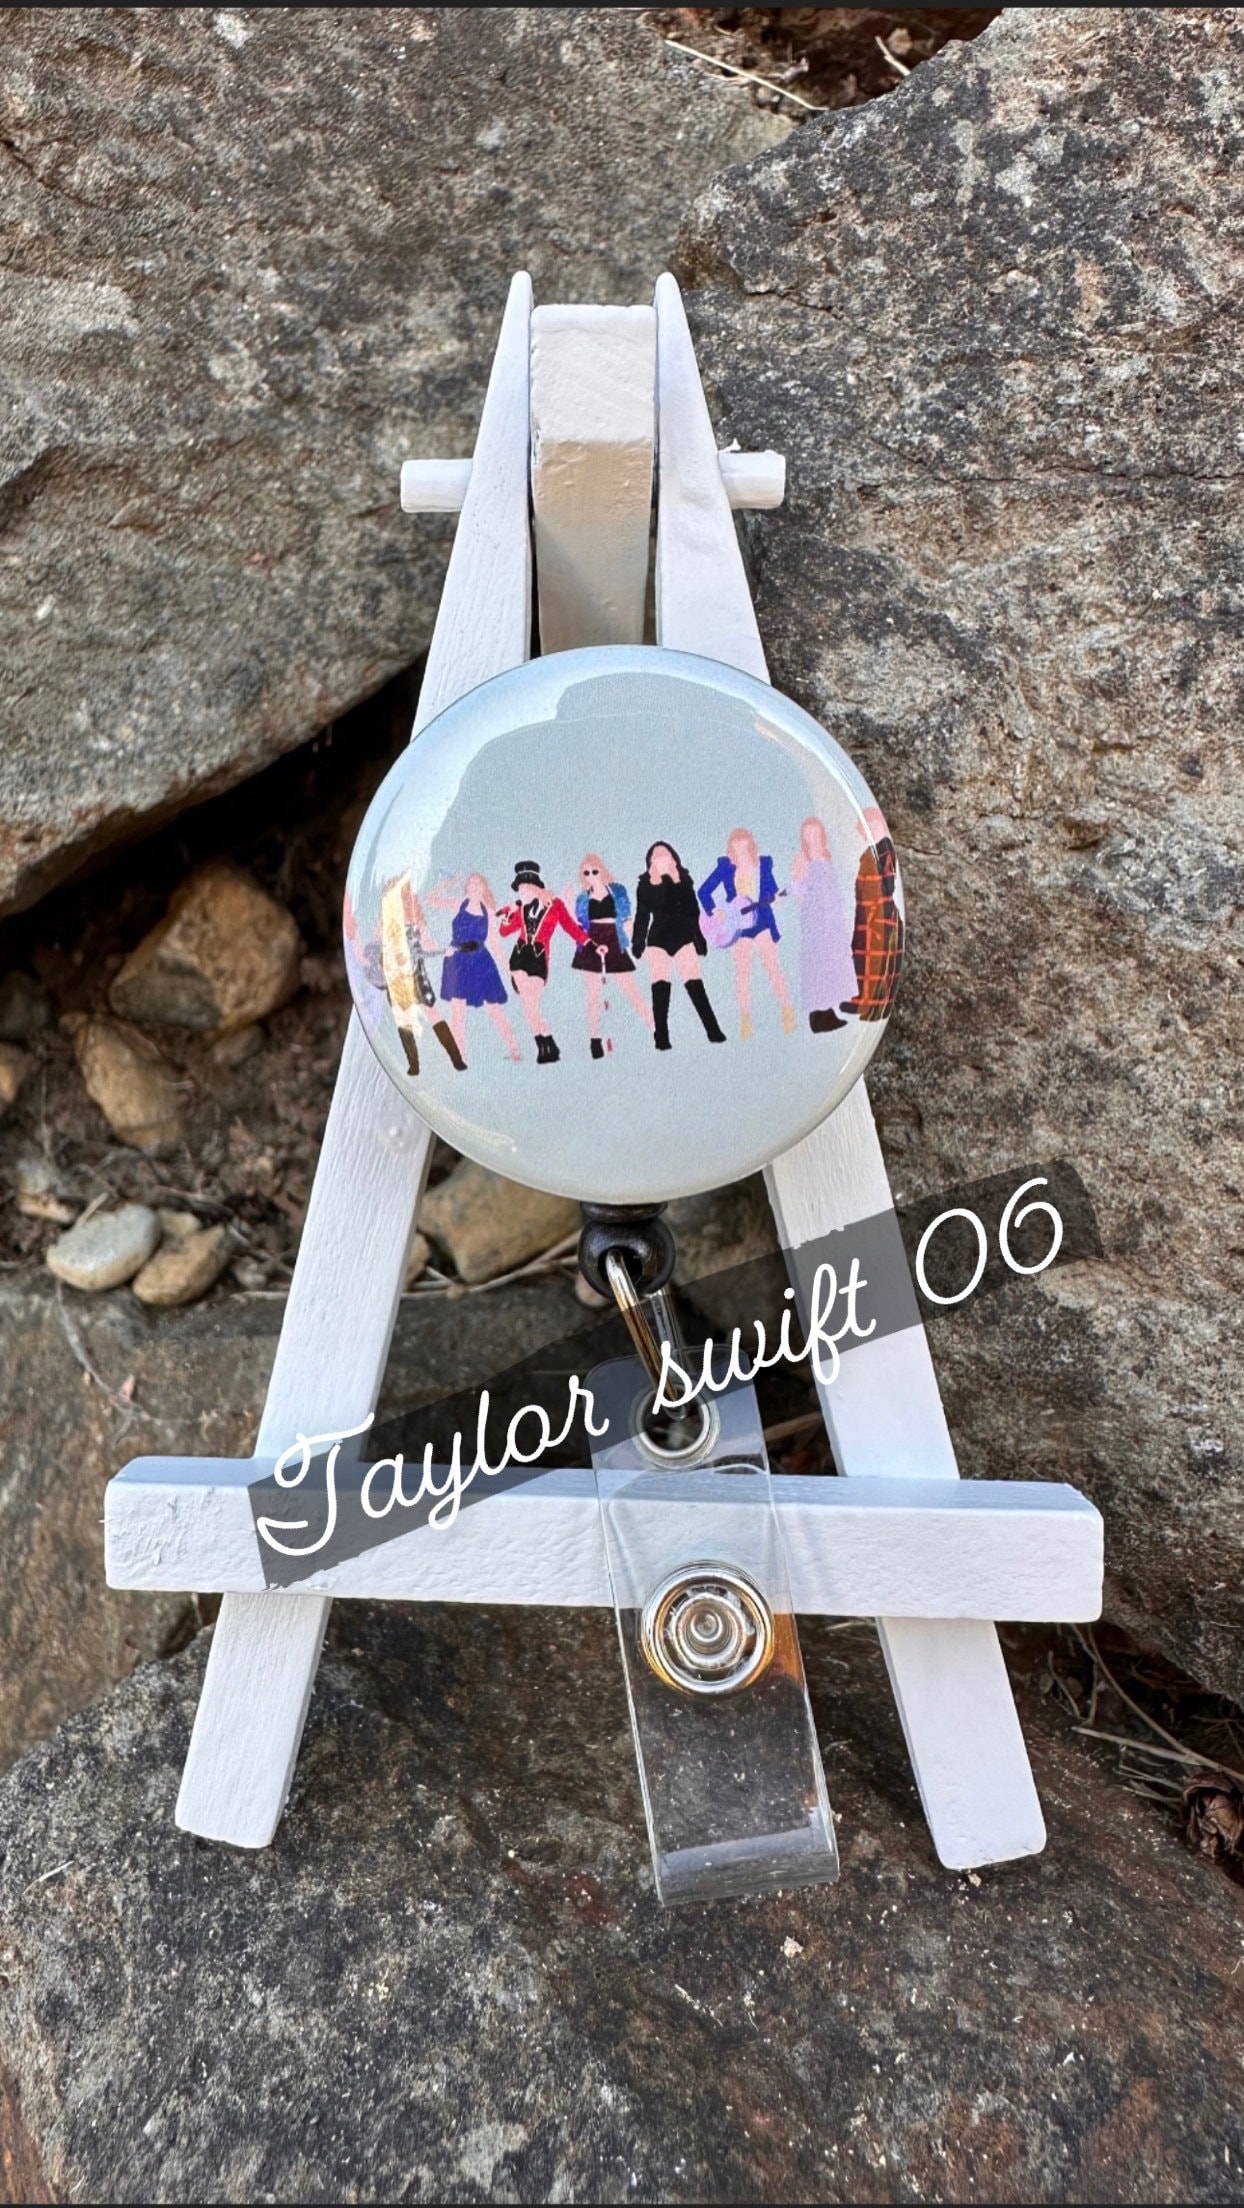 Taylor Swift Eras Retractable Badge Reel Nurse Clip Eras Tour Albums Swifty  Lanyard Speak Now Fearless Lover Reputation RED 1989 Evermore -  Canada